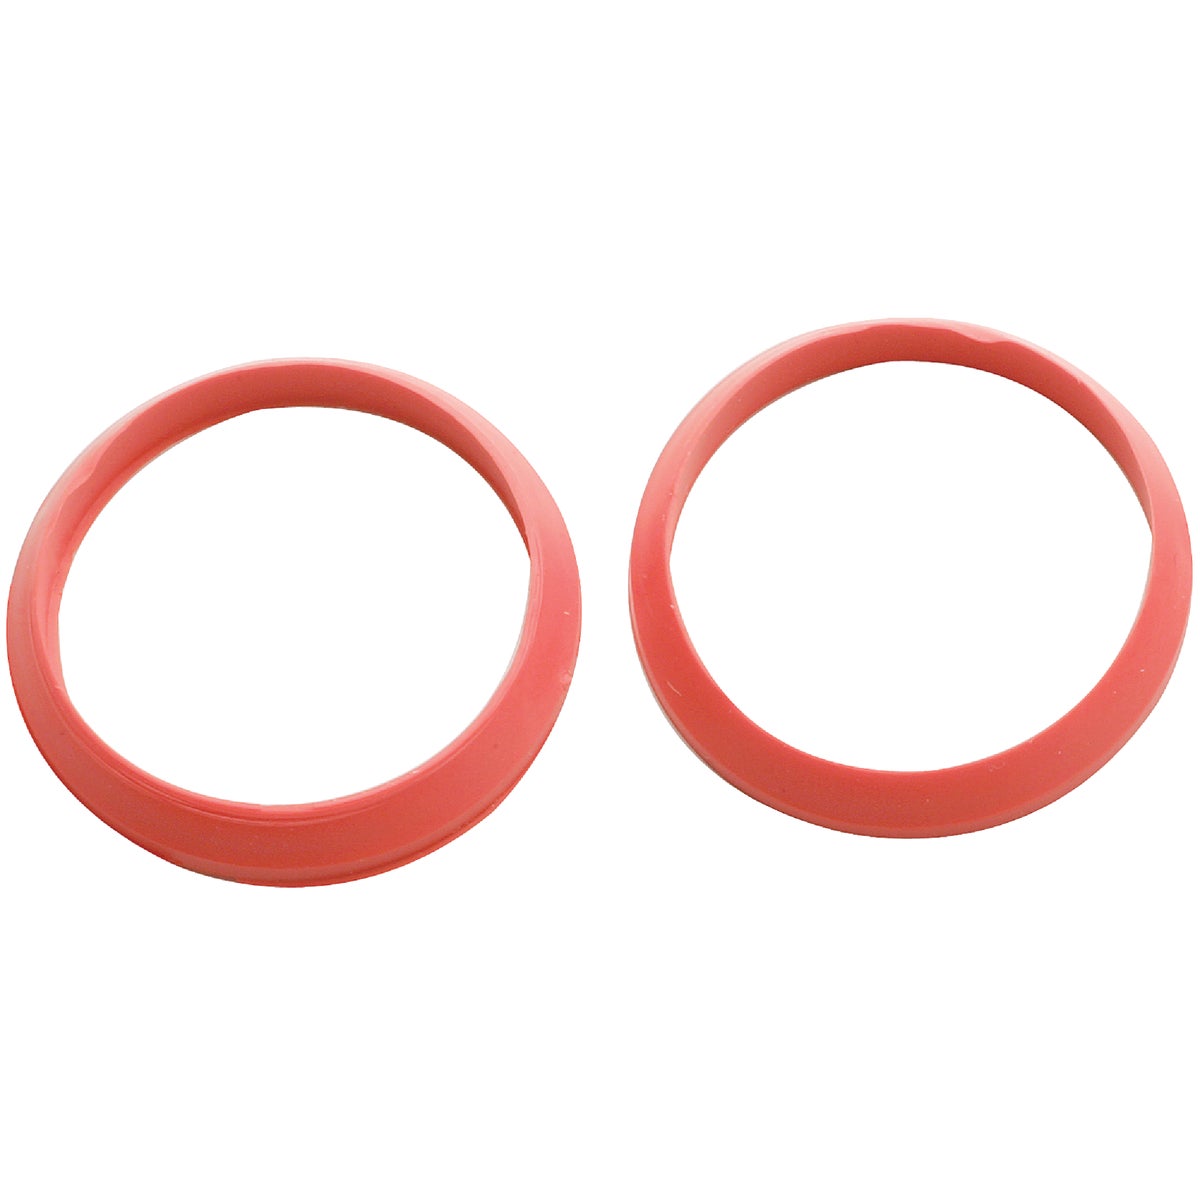 Item 405207, Rubber slip-joint washers. 2 per card.